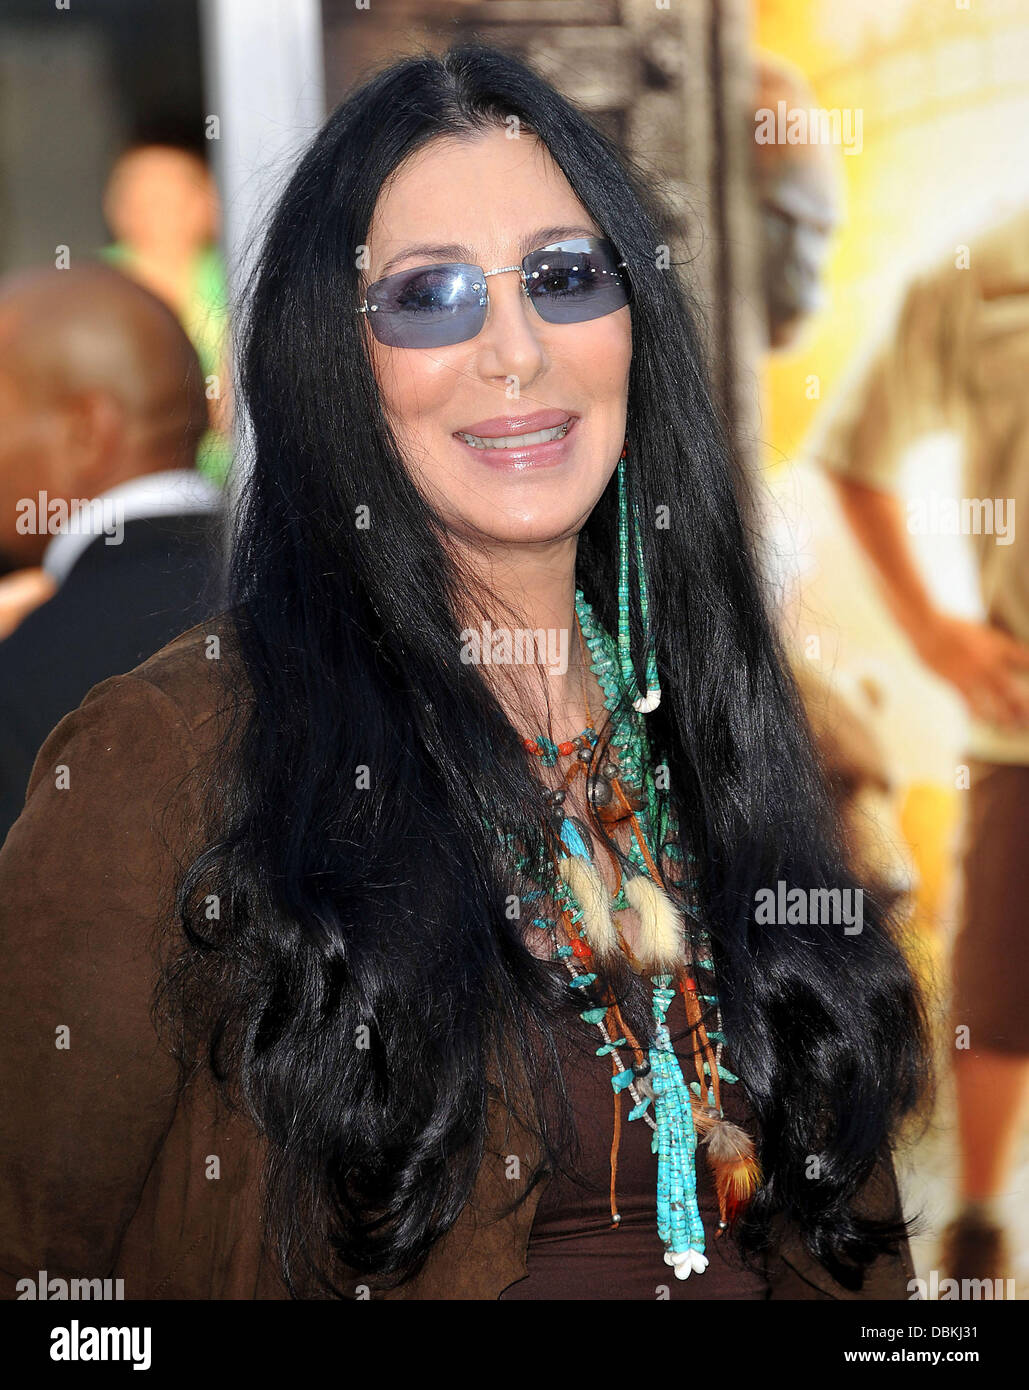 Singer Cher The Los Angeles Premiere of 'Zookeeper' held at the Regency Village Theatre - Arrivals Los Angeles, California - 06.07.11 Stock Photo